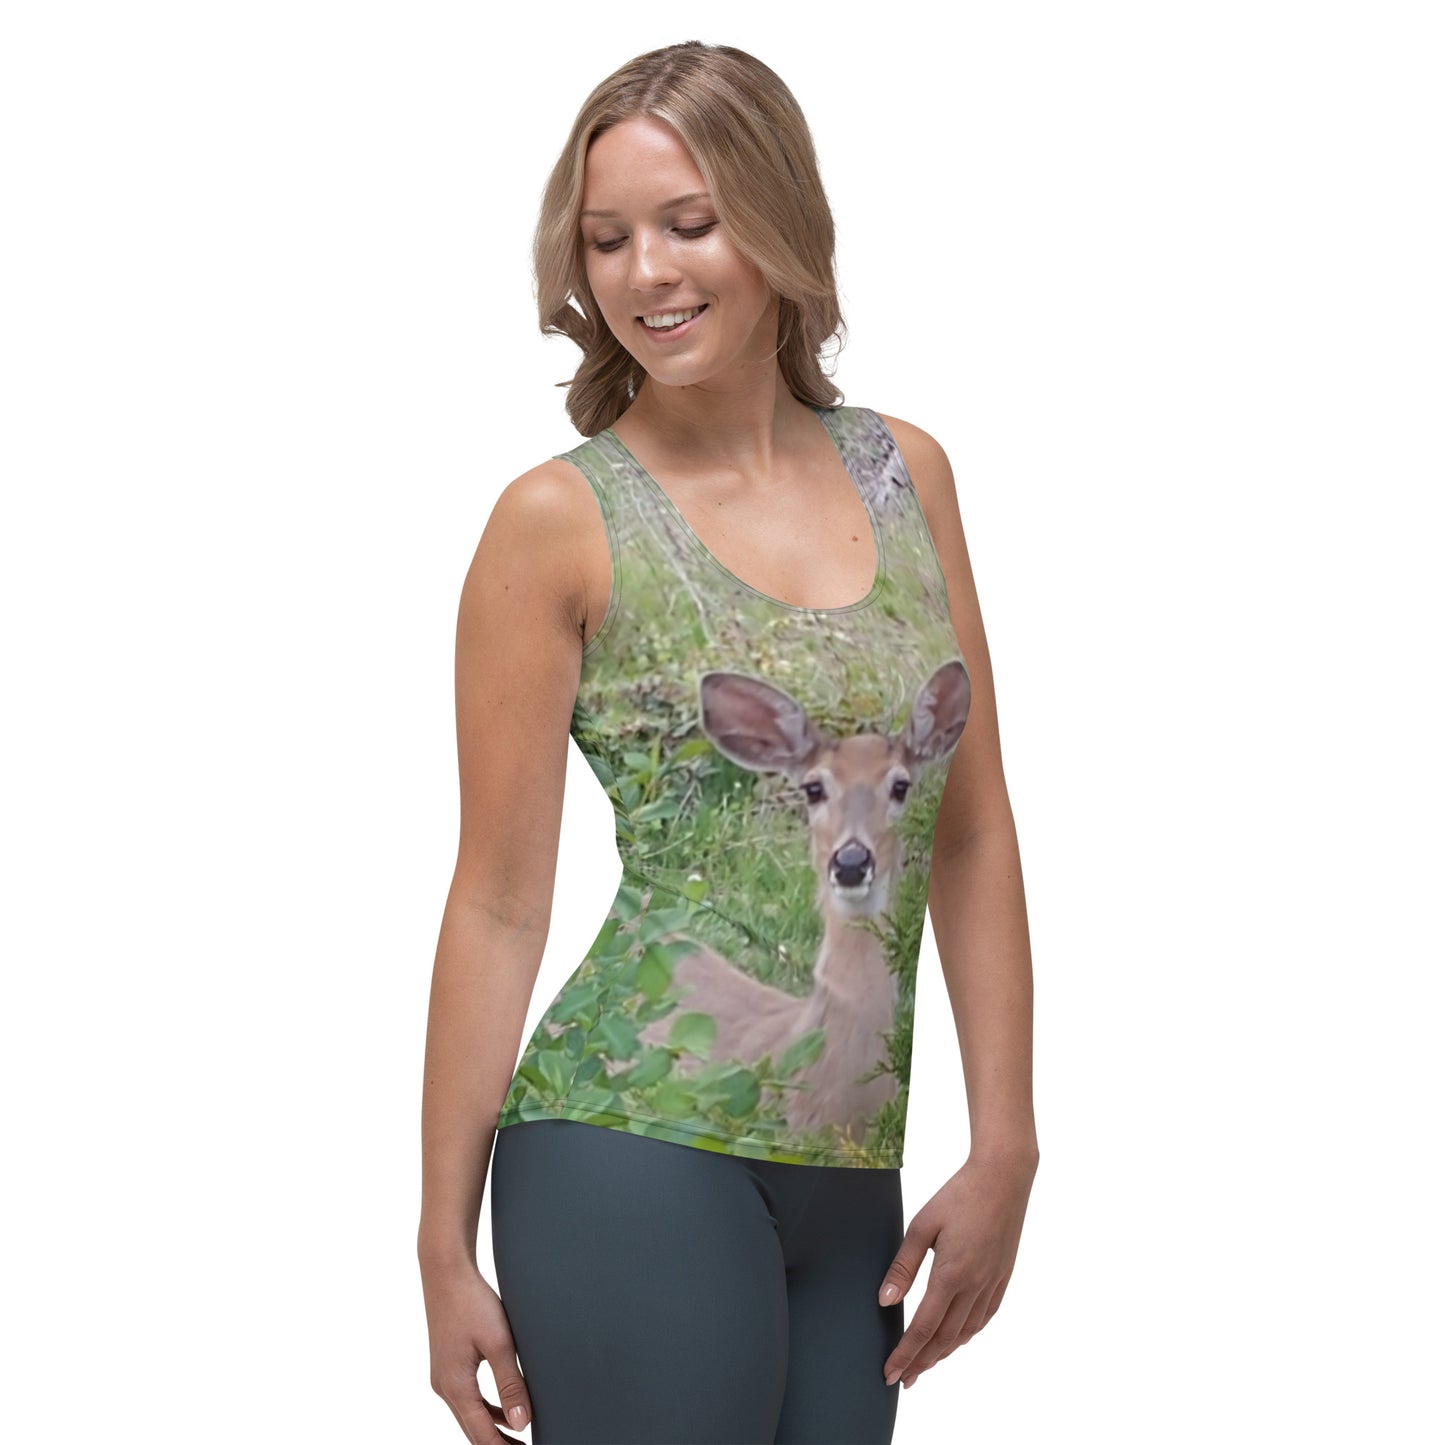 The EARTH LOVE Collection - "A Divine Doe" Design Tank Top